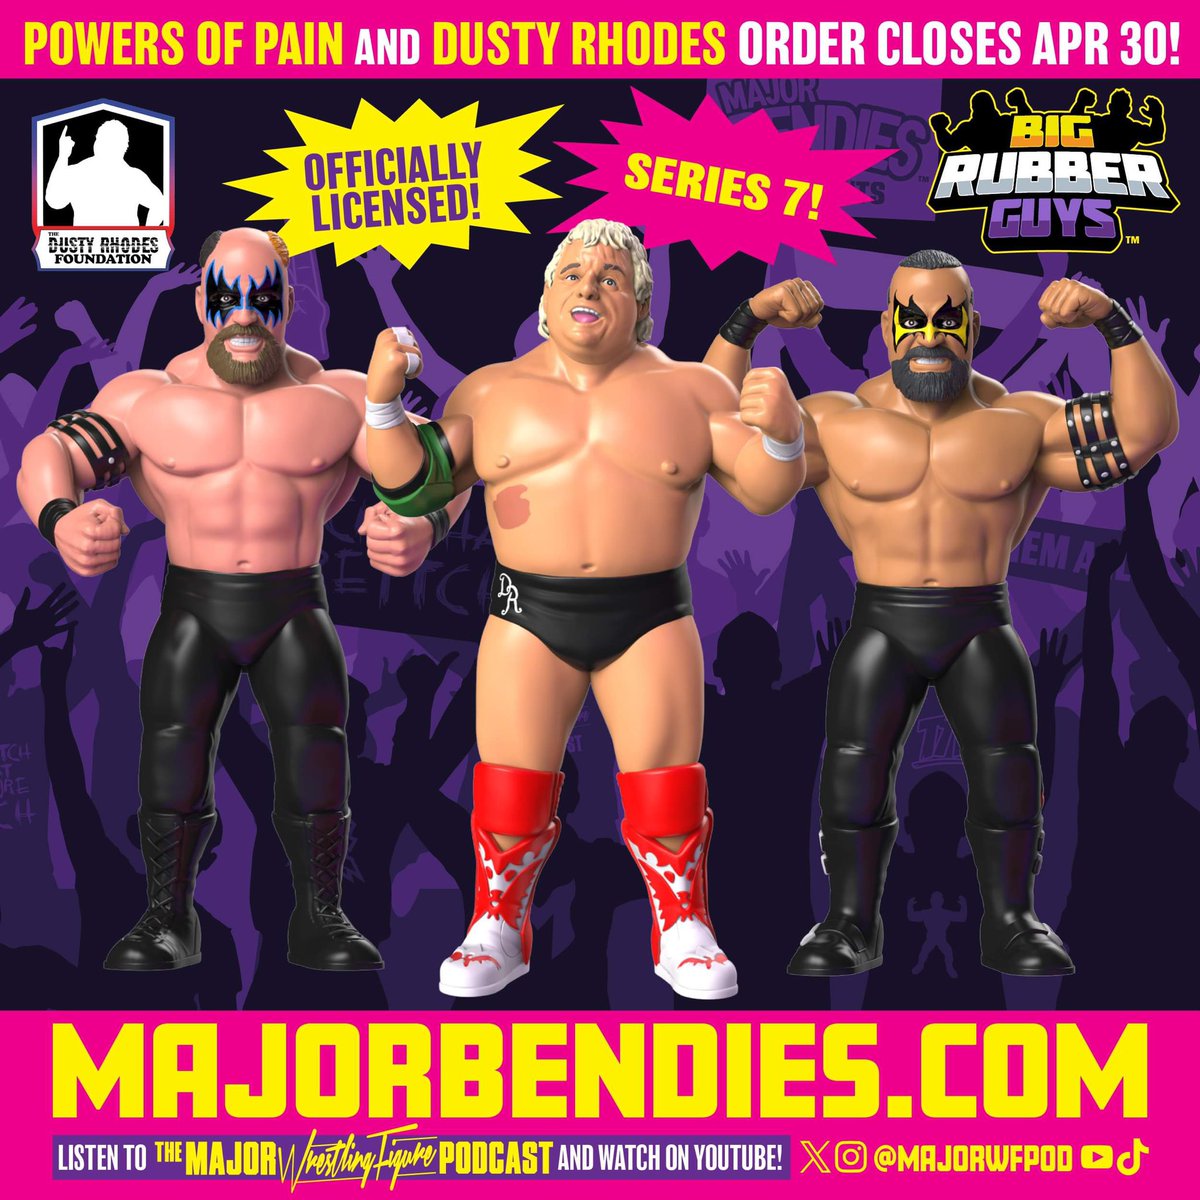 Place your #BigRubberGuys orders at MajorBendies.com before the month is over!

#ScratchThatFigureItch